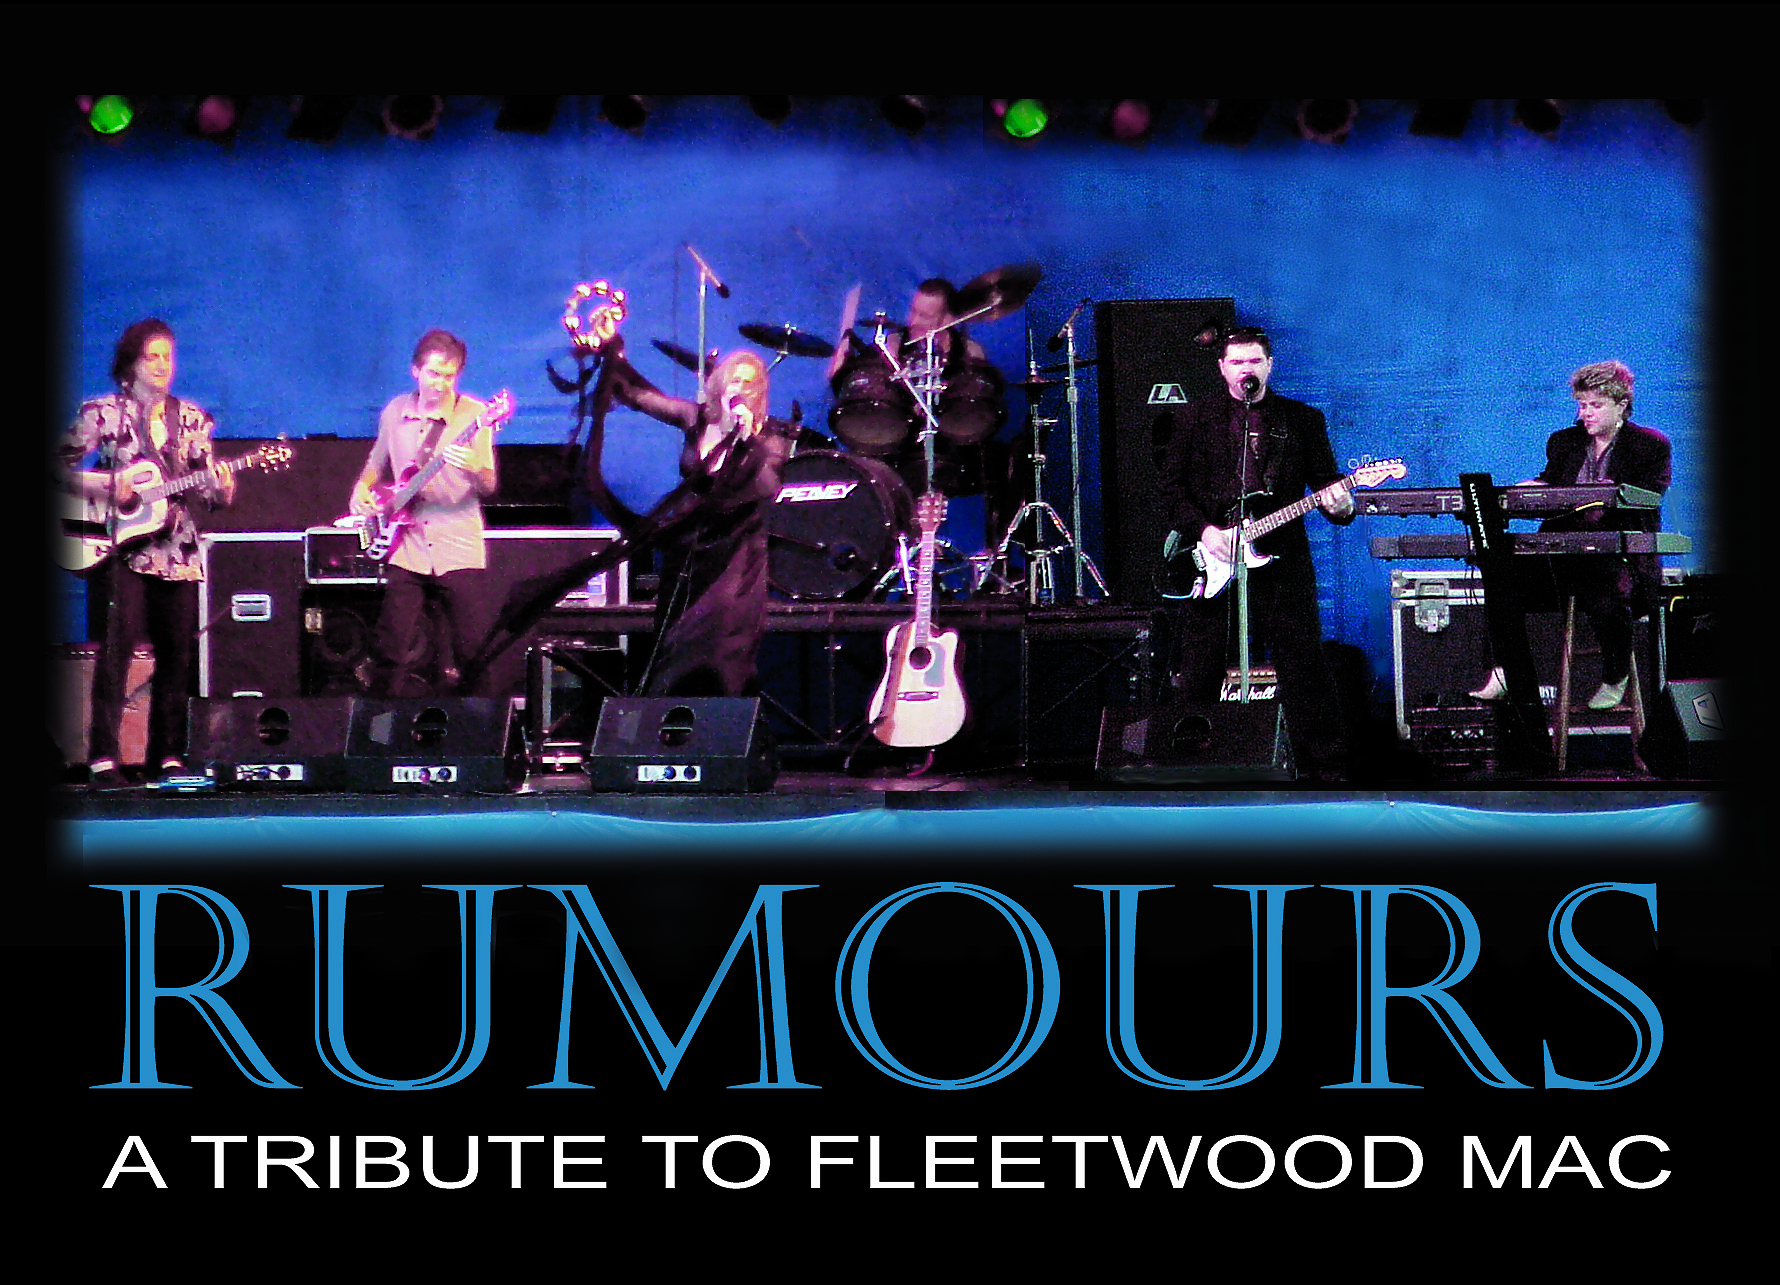 Rumours-A Tribute to Fleetwood Mac opening for Blood Sweat & Tears Susan Johnston as Stevie Nicks